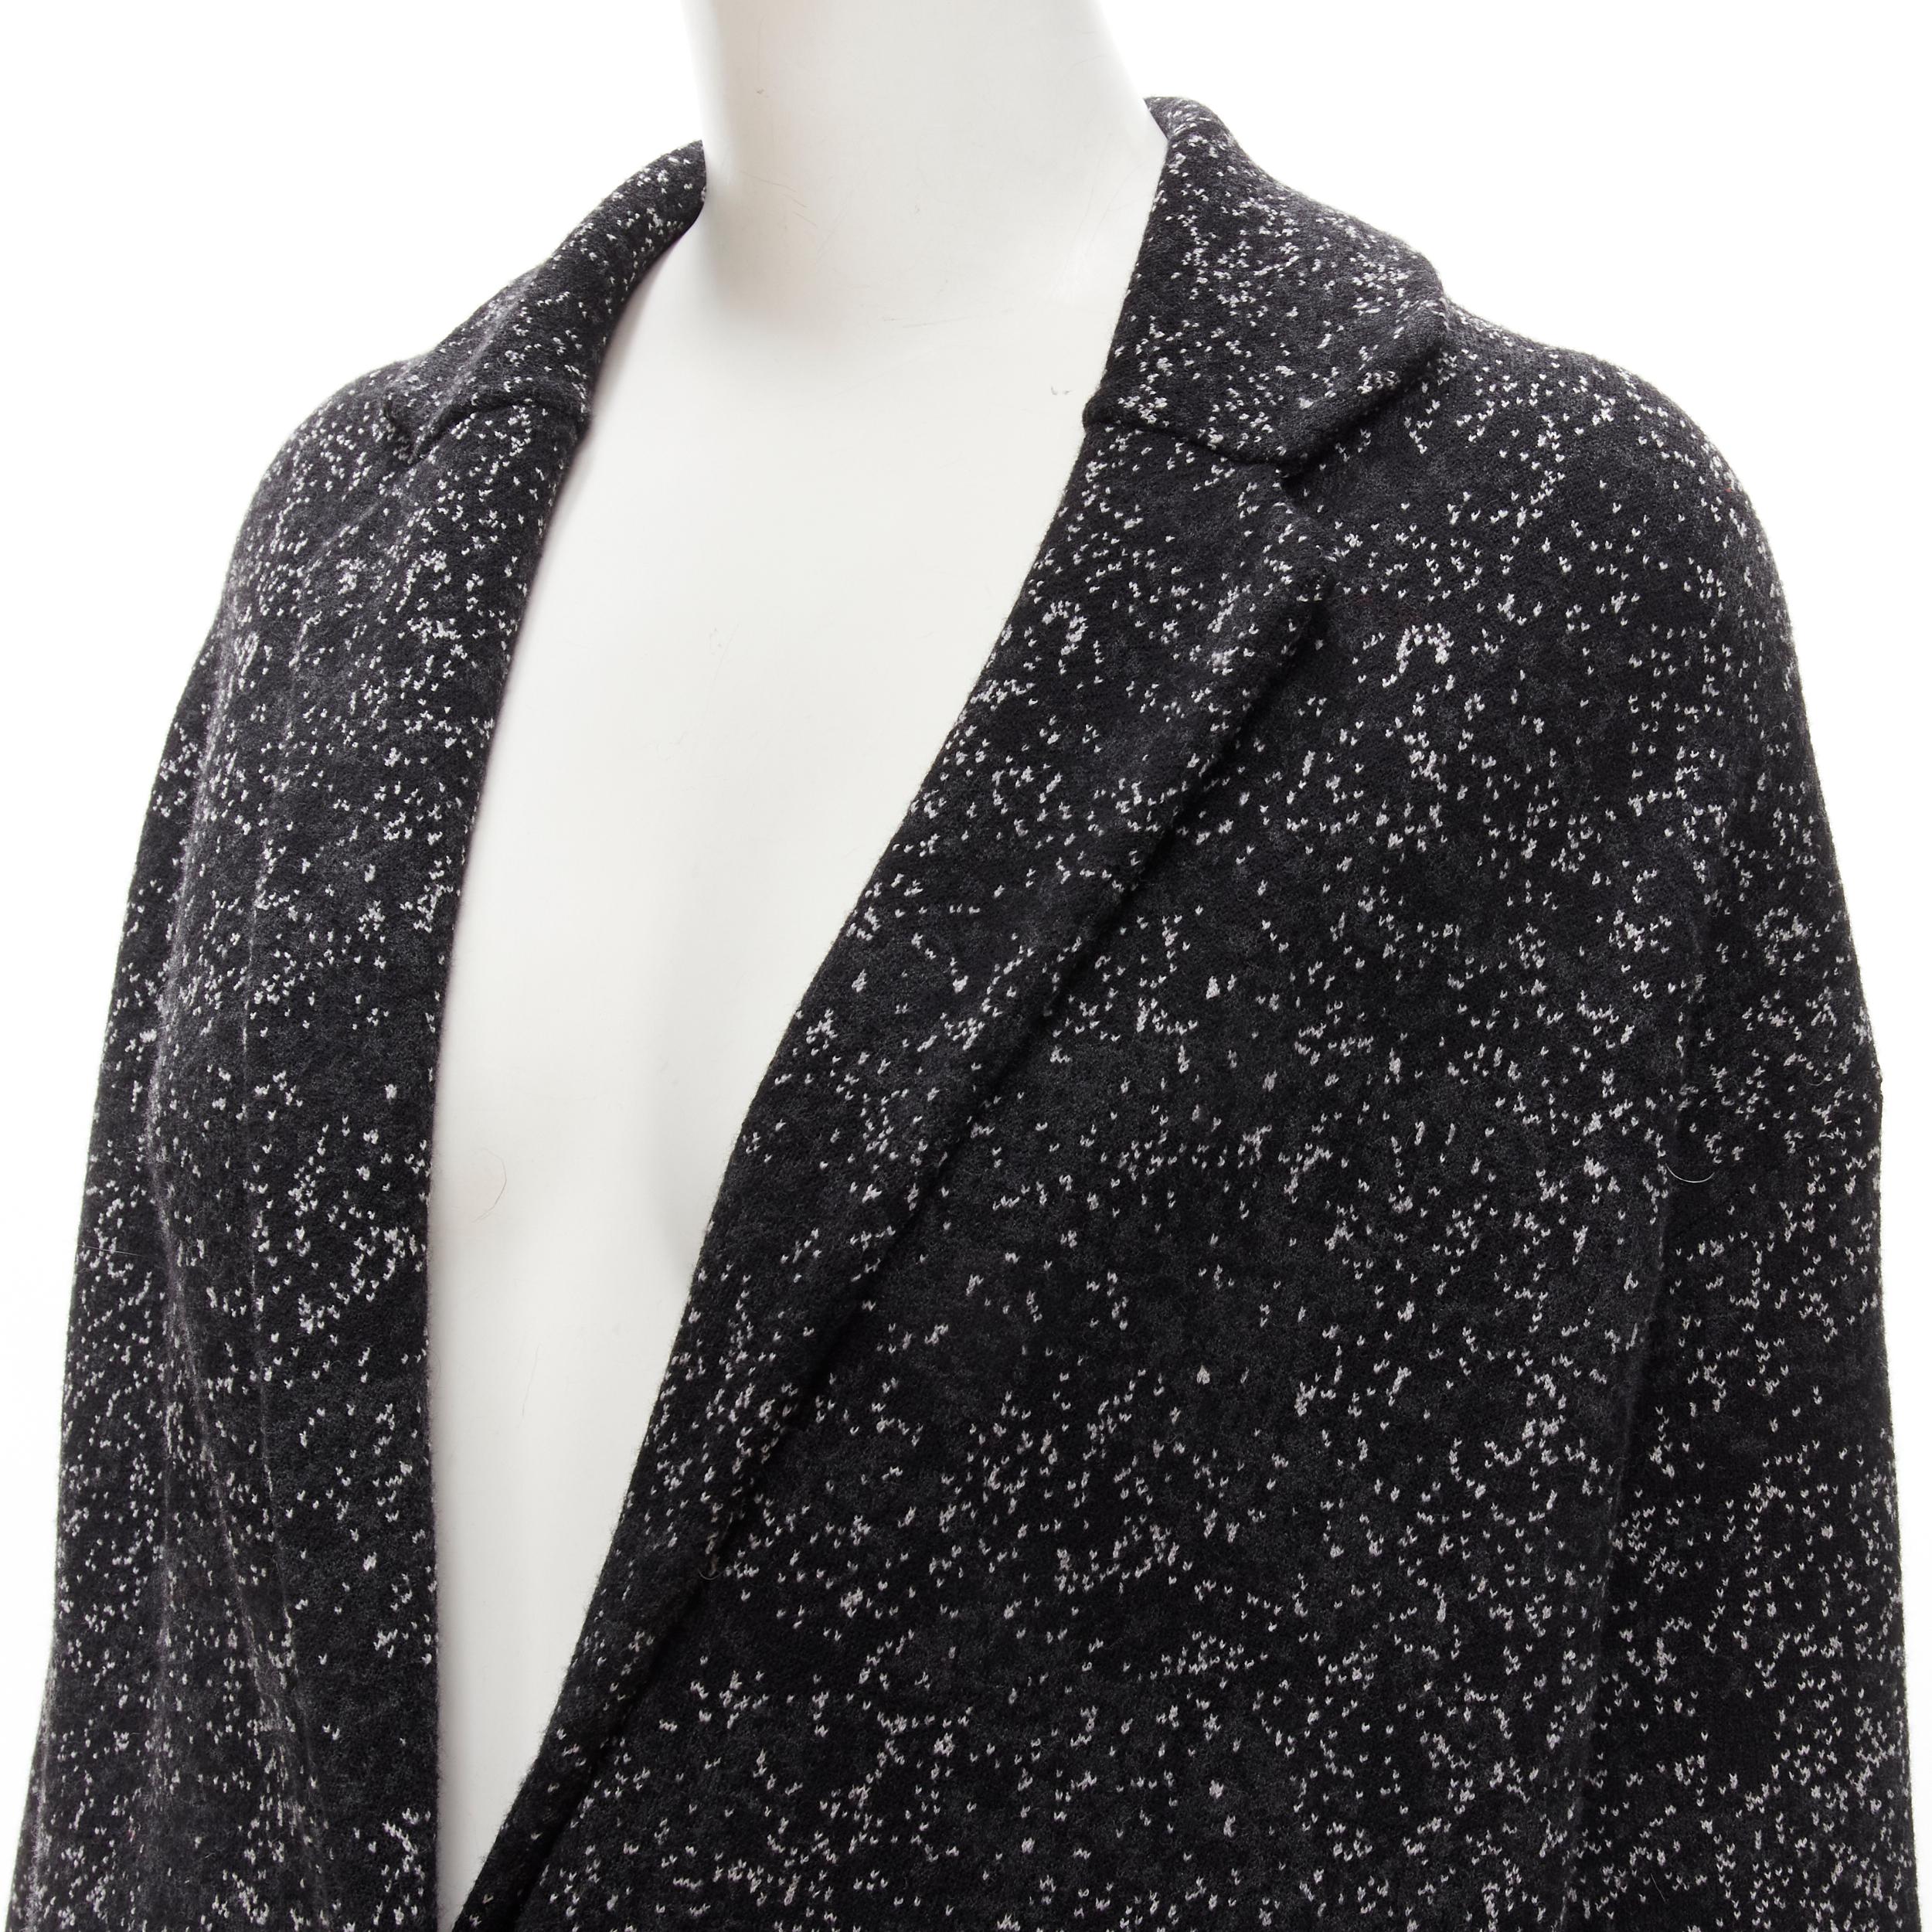 THEORY black grey speckle wool blend knitted robe coat S
Brand: Theory
Material: Wool
Color: Grey
Pattern: Solid
Closure: Button
Extra Detail: Spread collar. Single button front. Double patch pockets.
Made in: China

CONDITION:
Condition: Excellent,